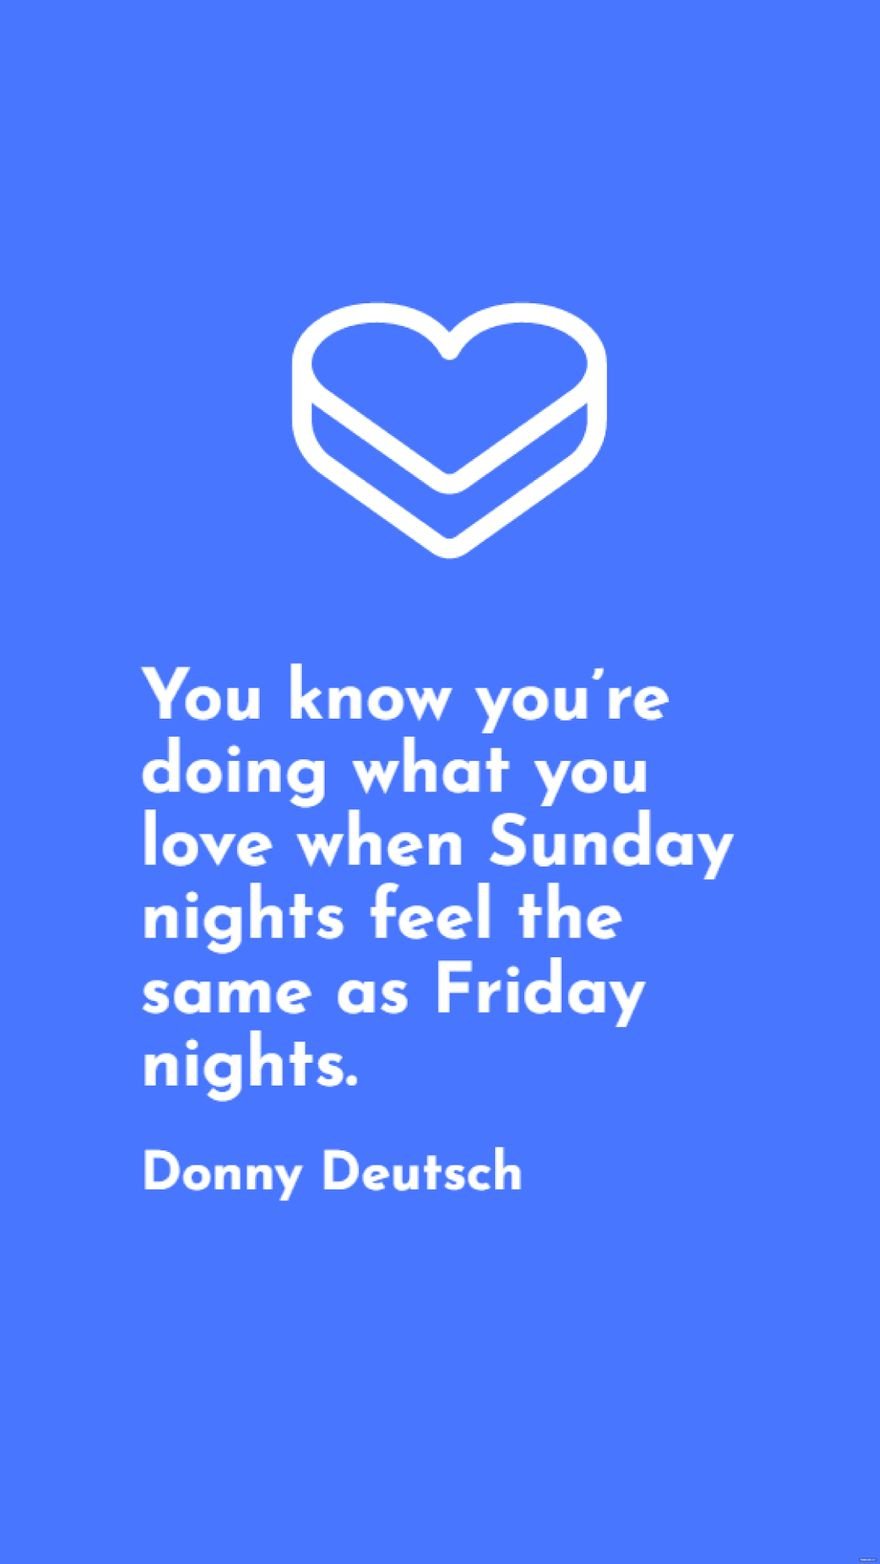 Free Donny Deutsch - You know you’re doing what you love when Sunday nights feel the same as Friday nights.